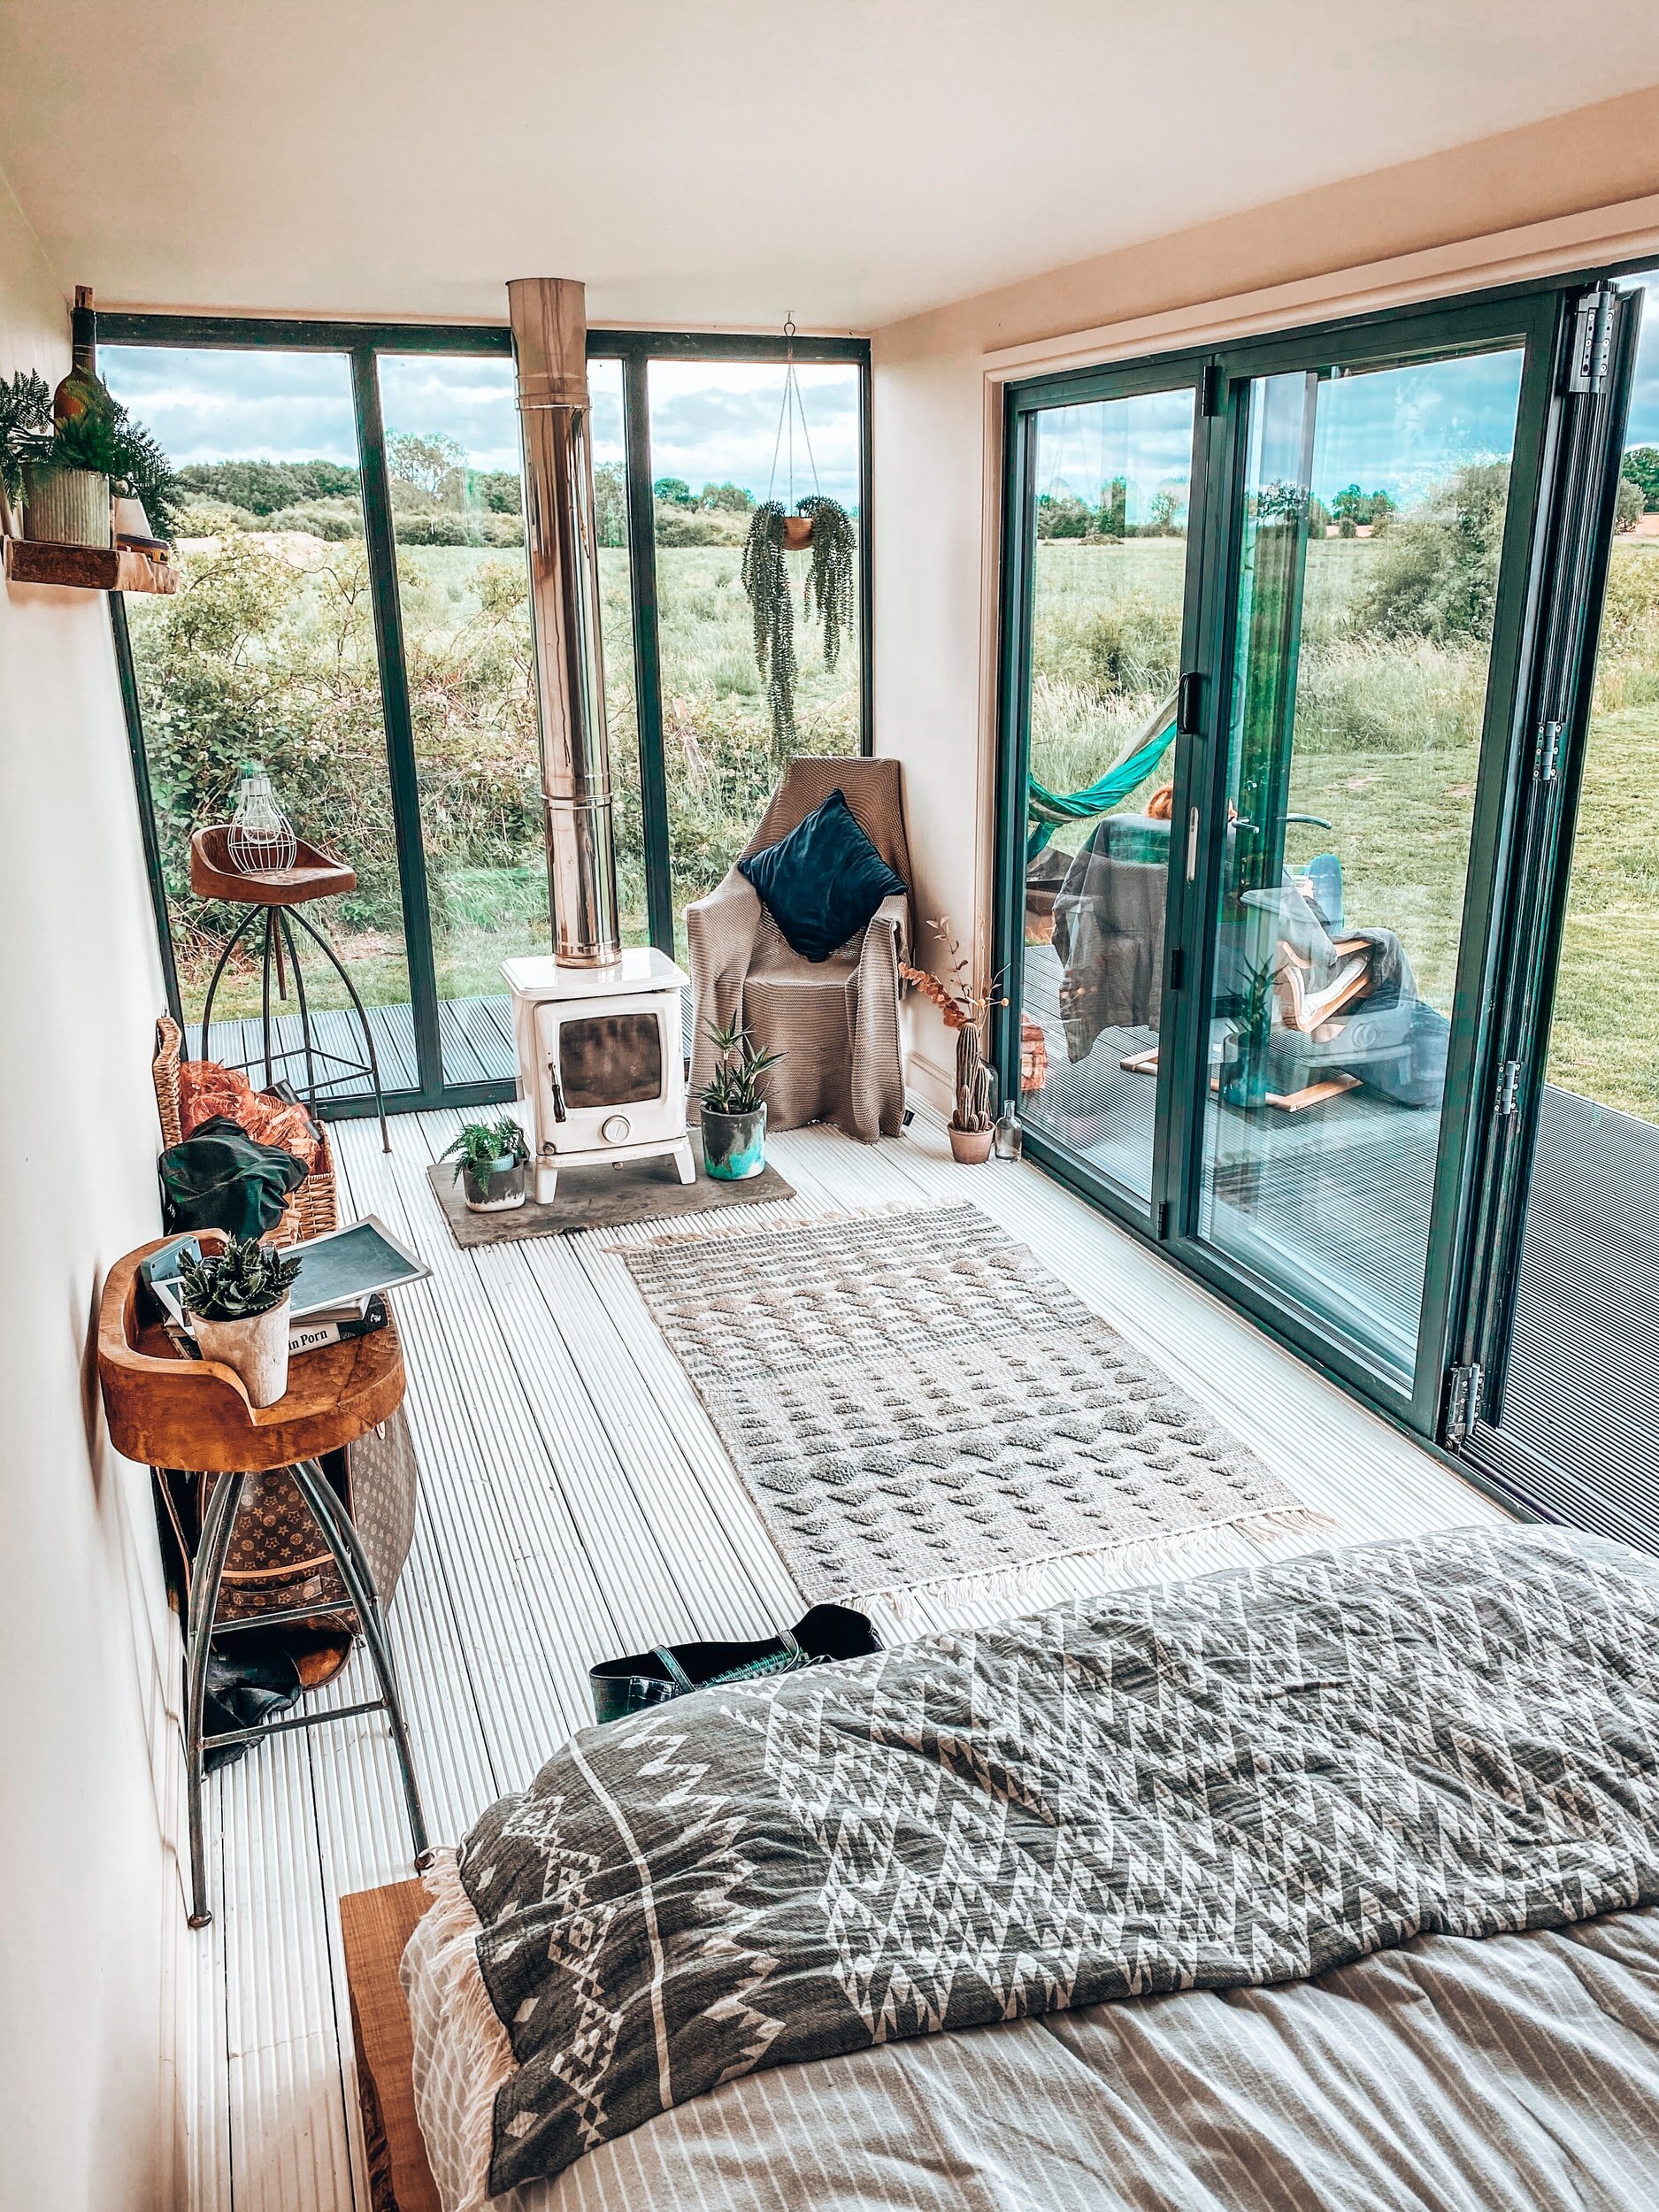 why live in a tiny house — Blog — Authentic Home